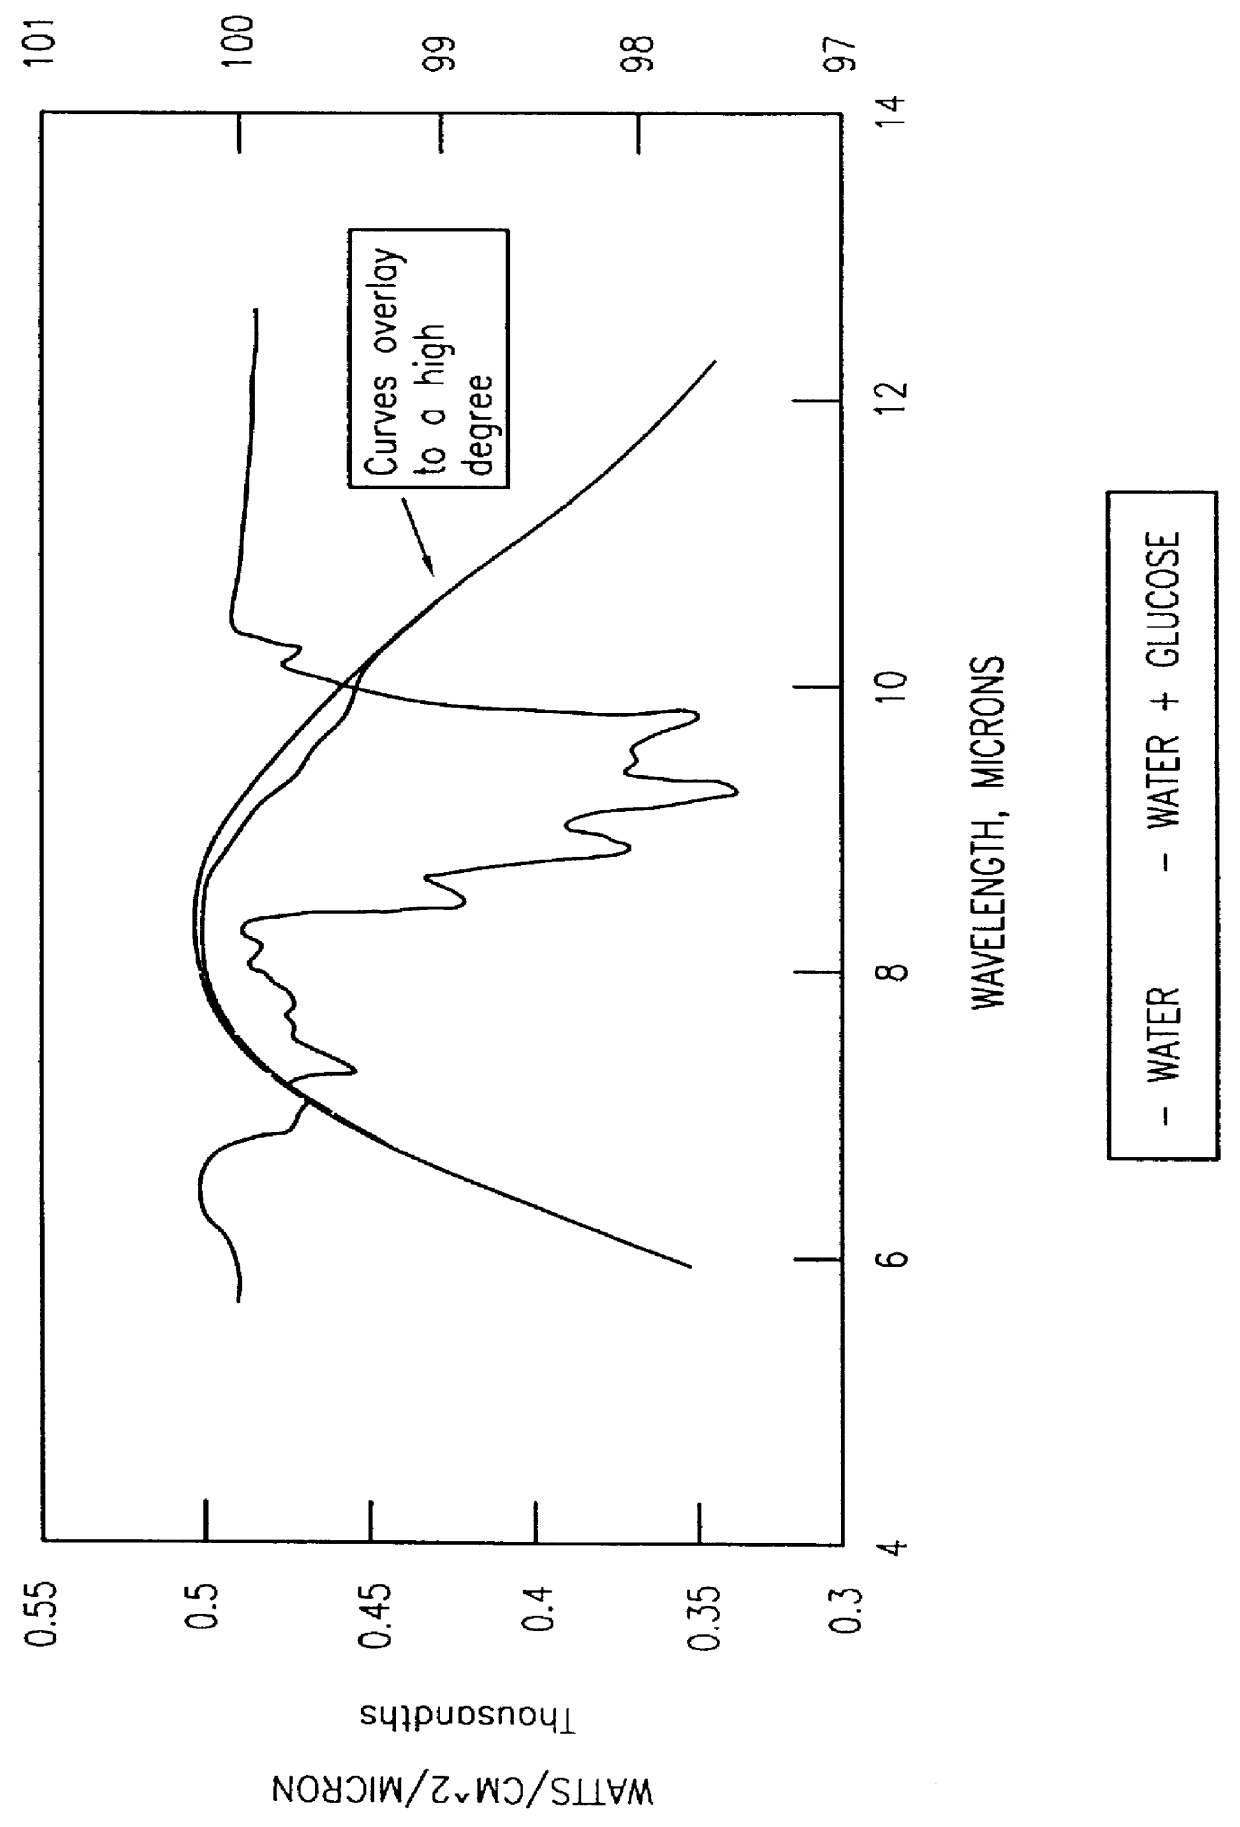 Subsurface thermal gradient spectrometry